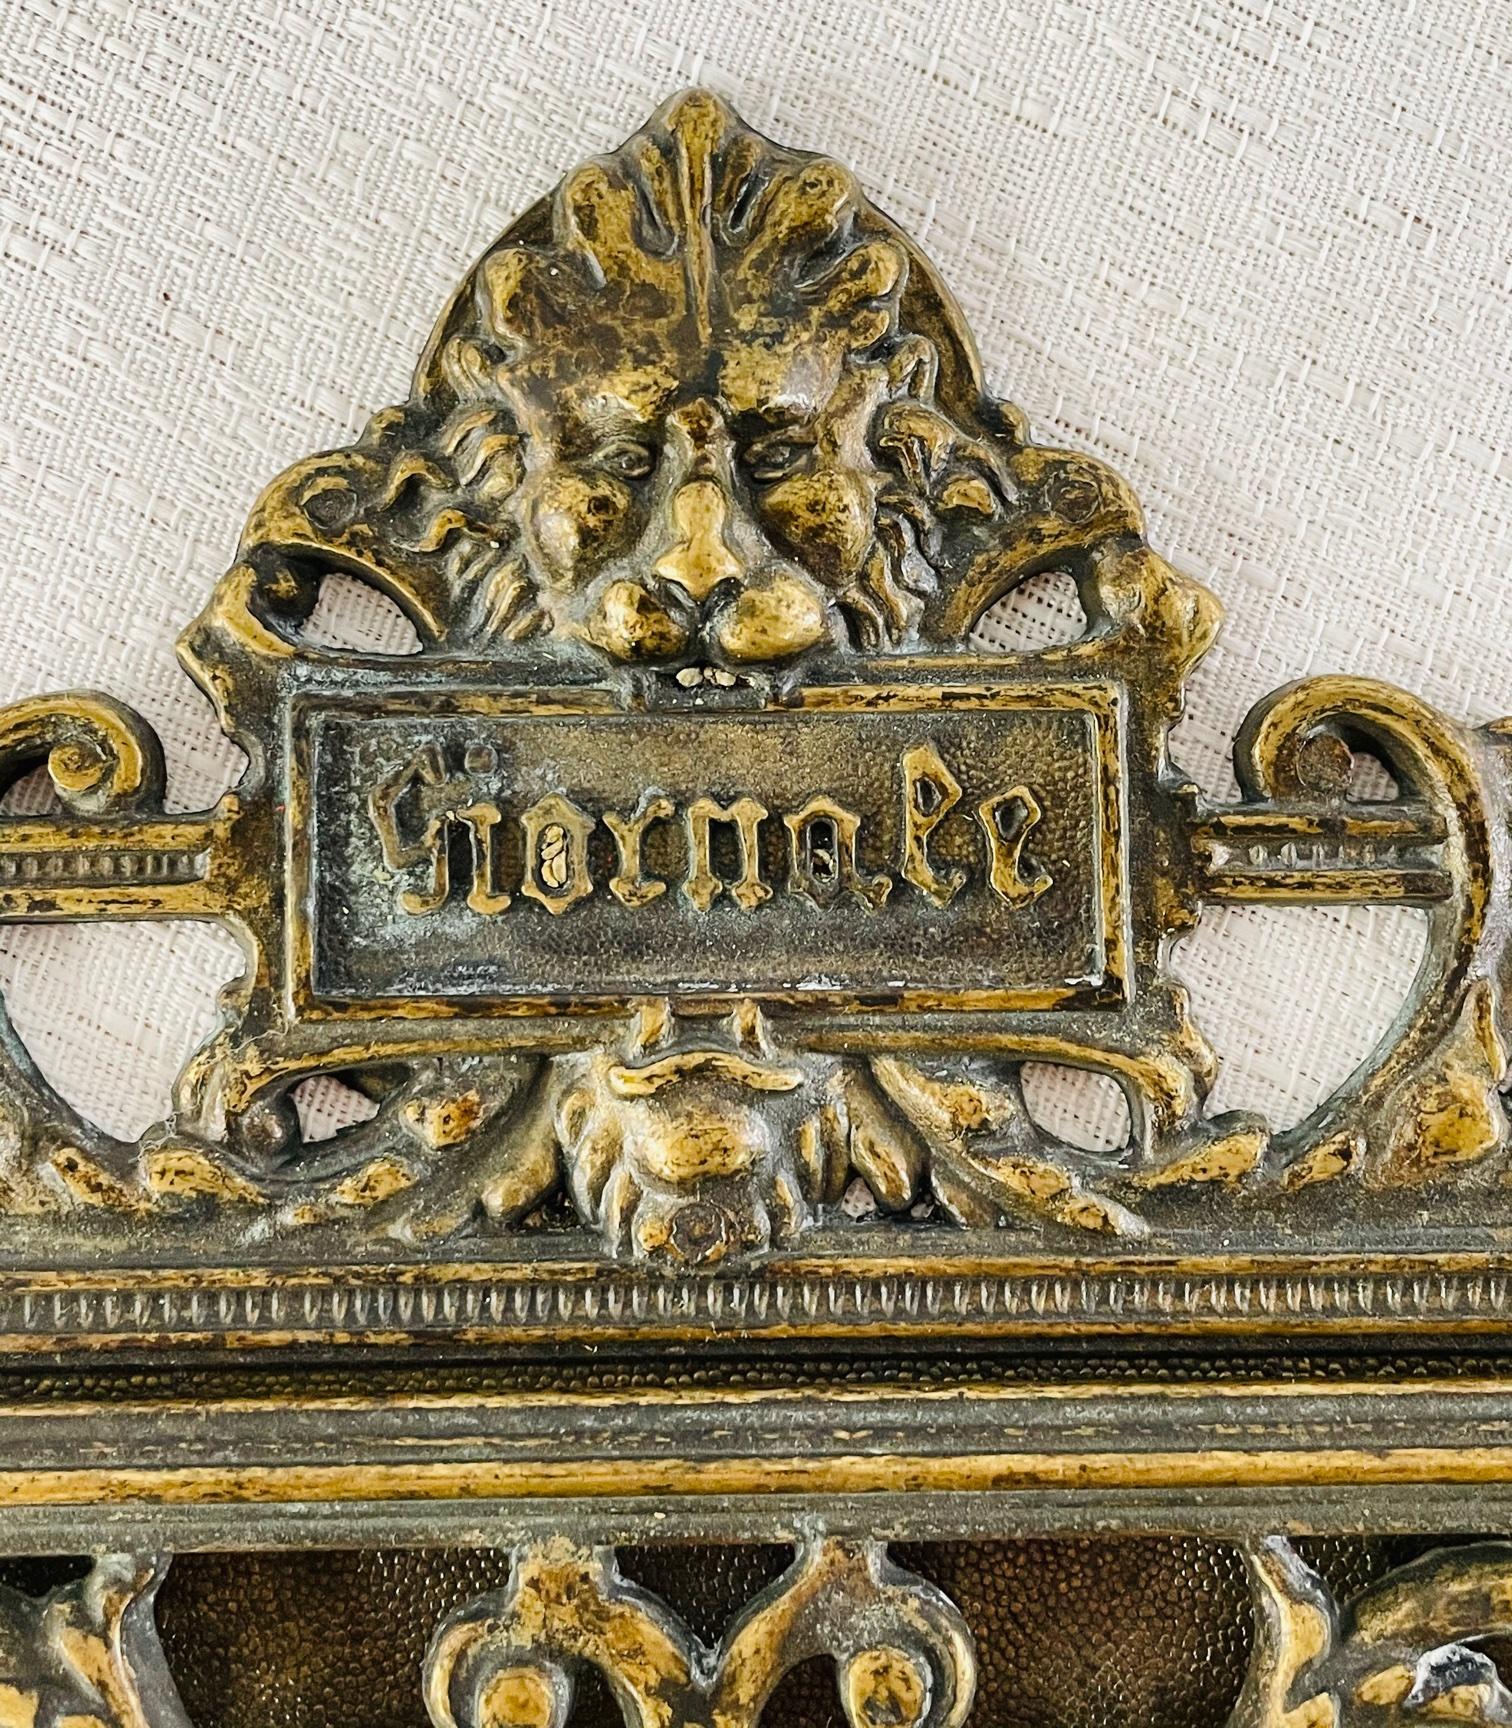 An antique 19th century Gothic bronze wall or door Mail holder. The mail holder features a God figure , possibly God Odin in the middle , two screaming figures on each side of the mail holder. Two winged angels above the God on each side. The top